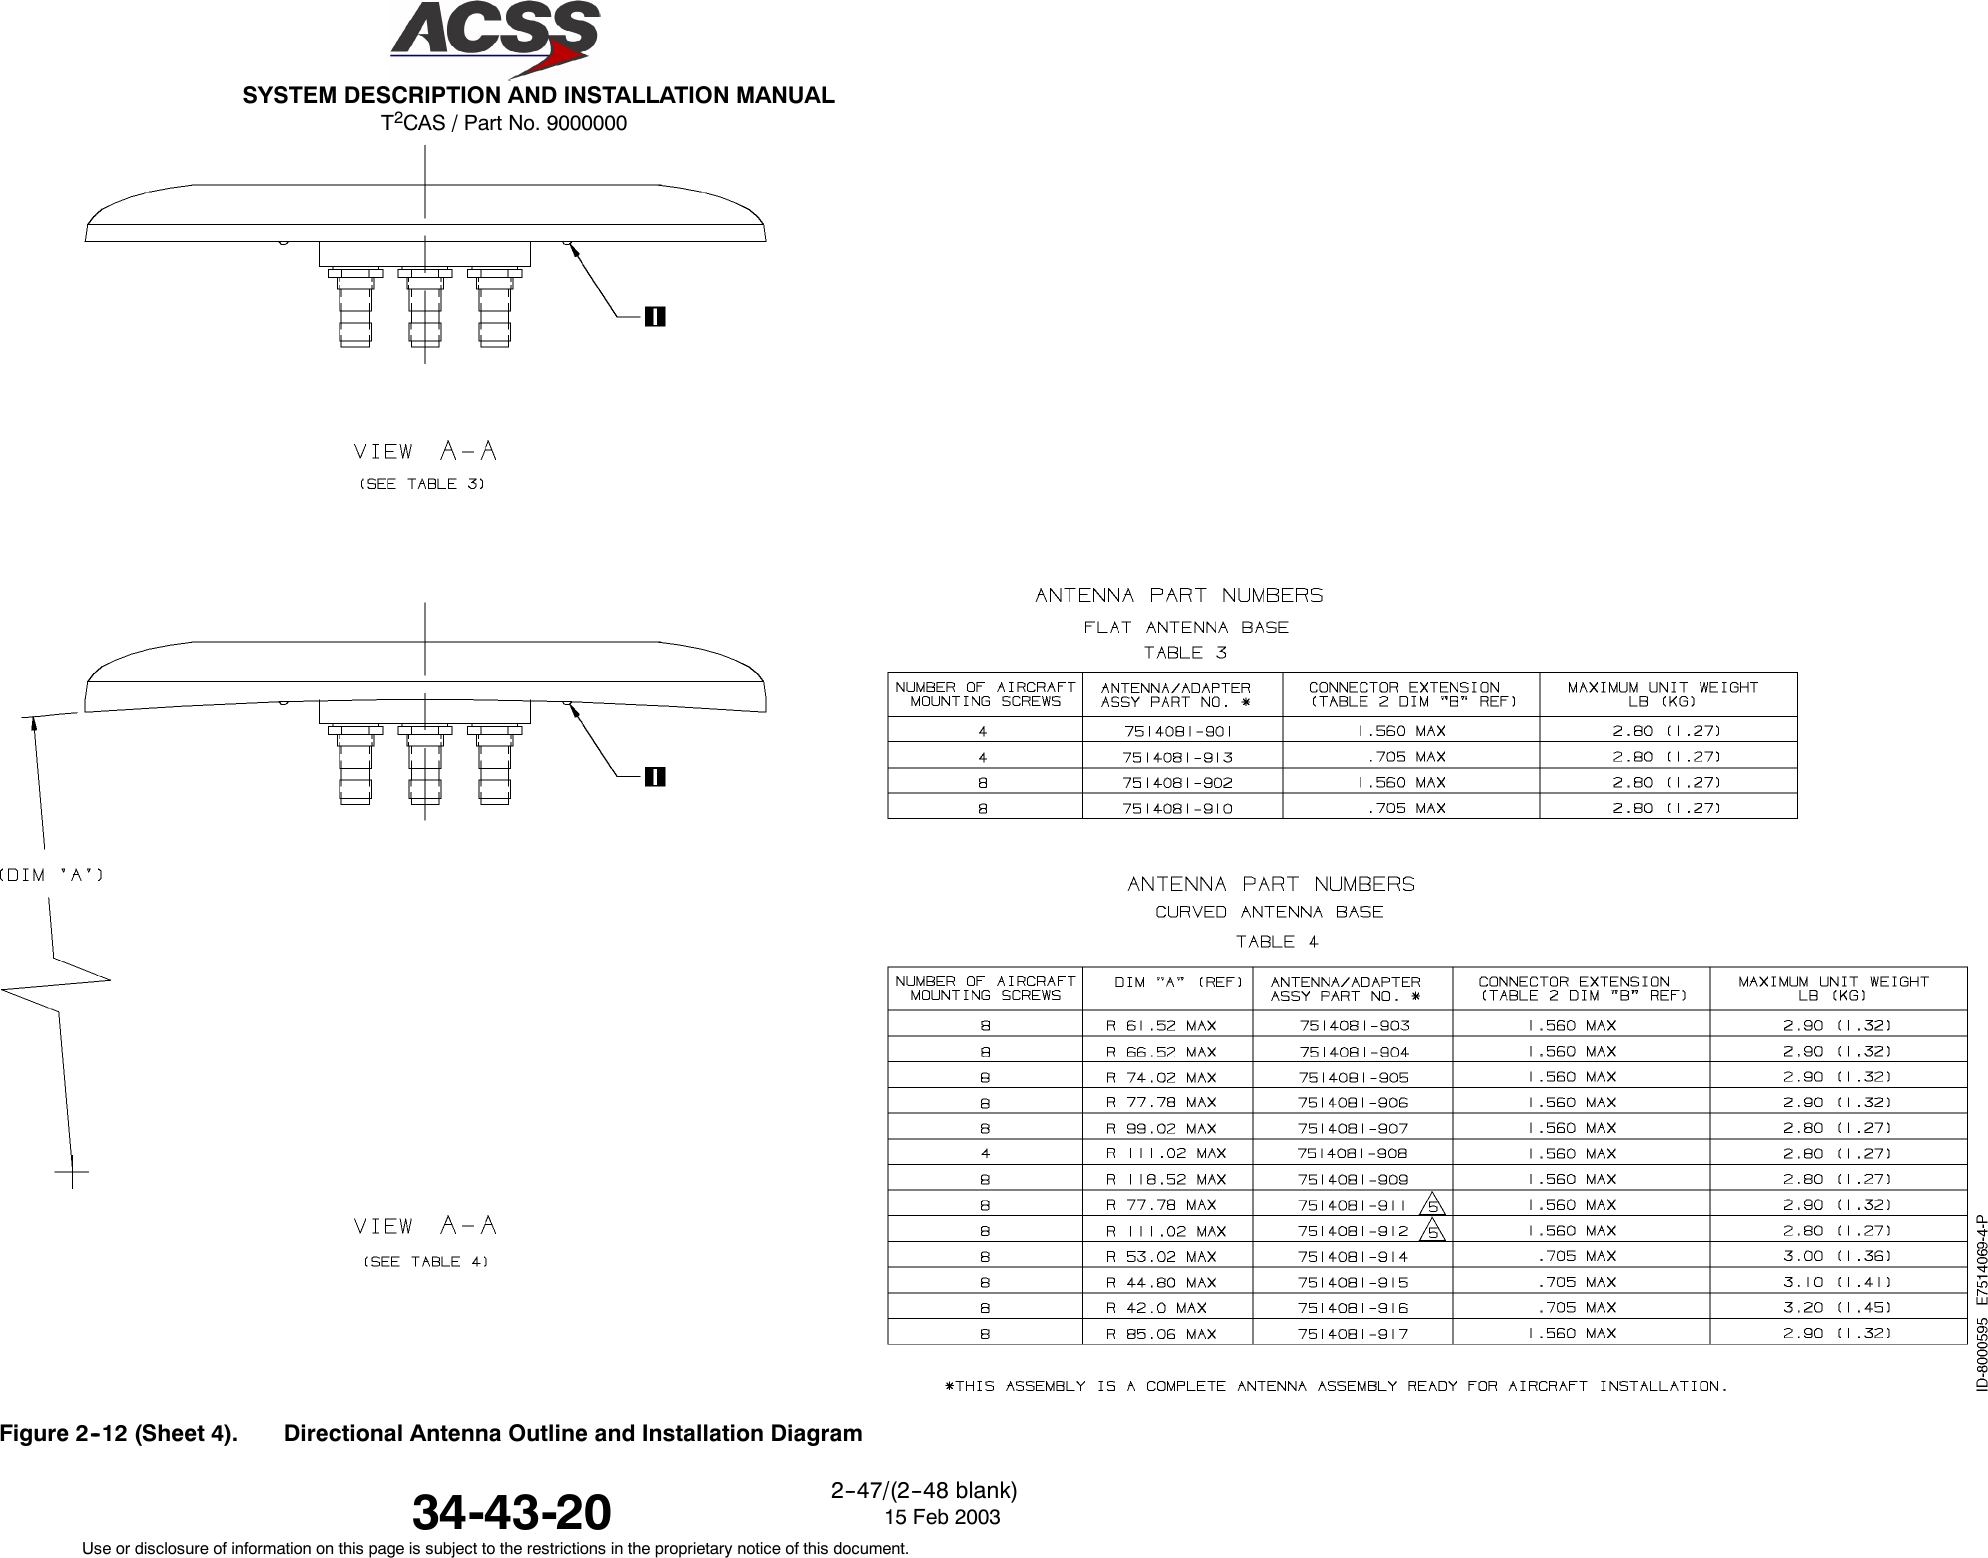 T2CAS / Part No. 9000000SYSTEM DESCRIPTION AND INSTALLATION MANUAL34-43-20 15 Feb 2003Use or disclosure of information on this page is subject to the restrictions in the proprietary notice of this document.2--47/(2--48 blank)Figure 2--12 (Sheet 4). Directional Antenna Outline and Installation Diagram